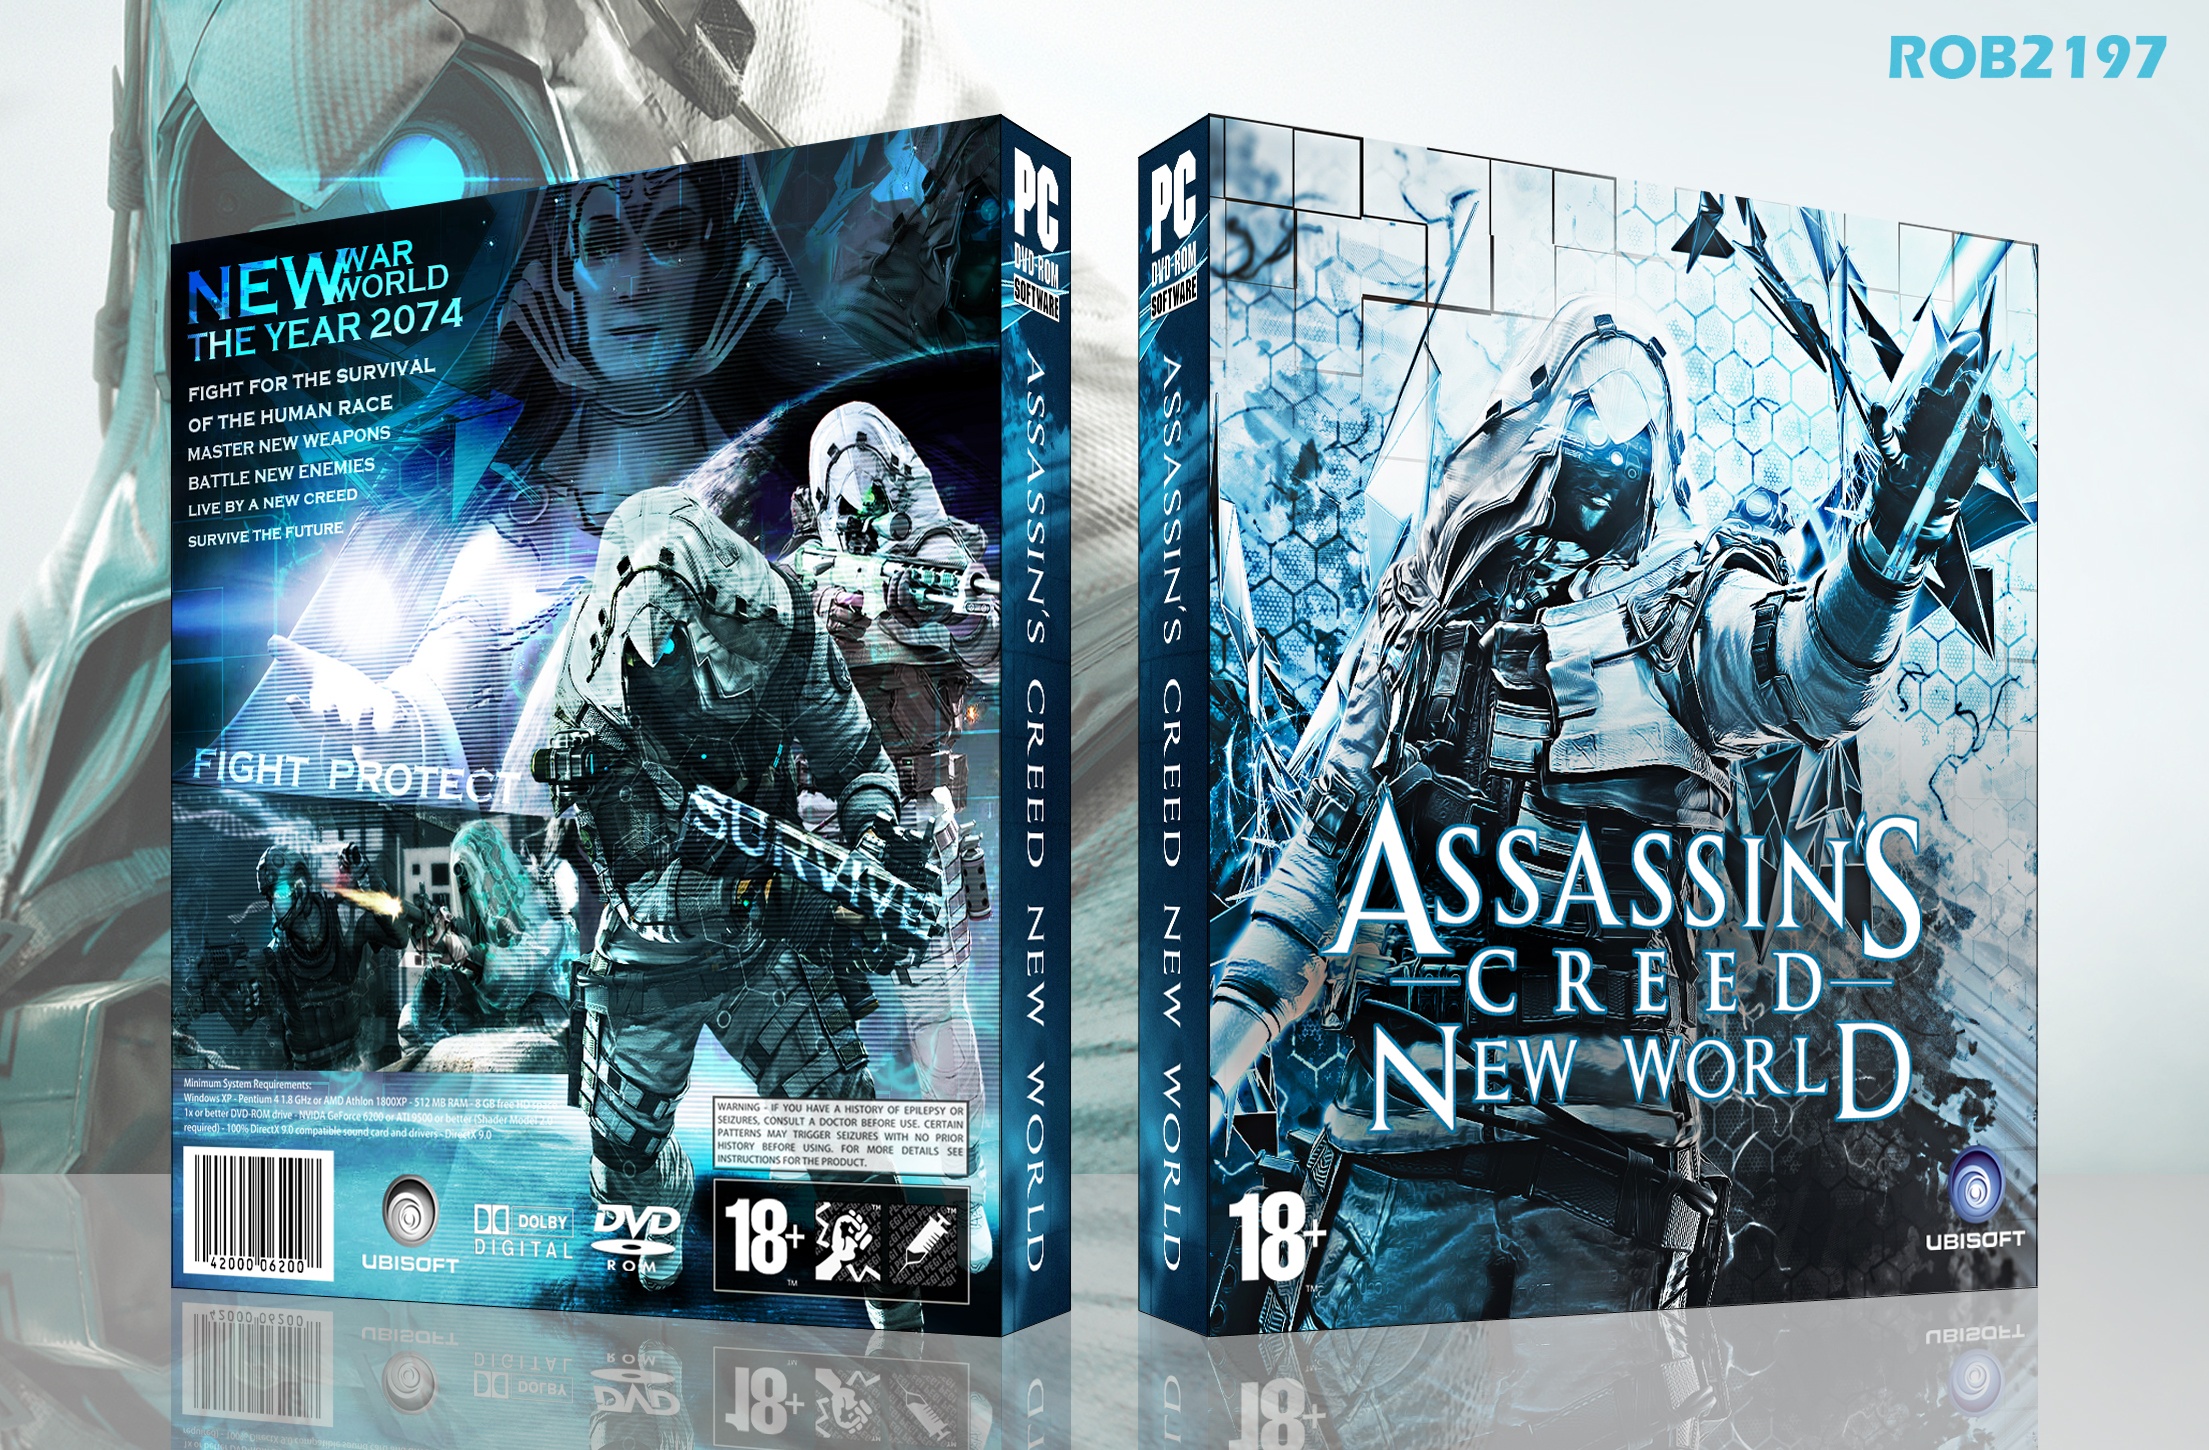 Assassin's Creed New World box cover